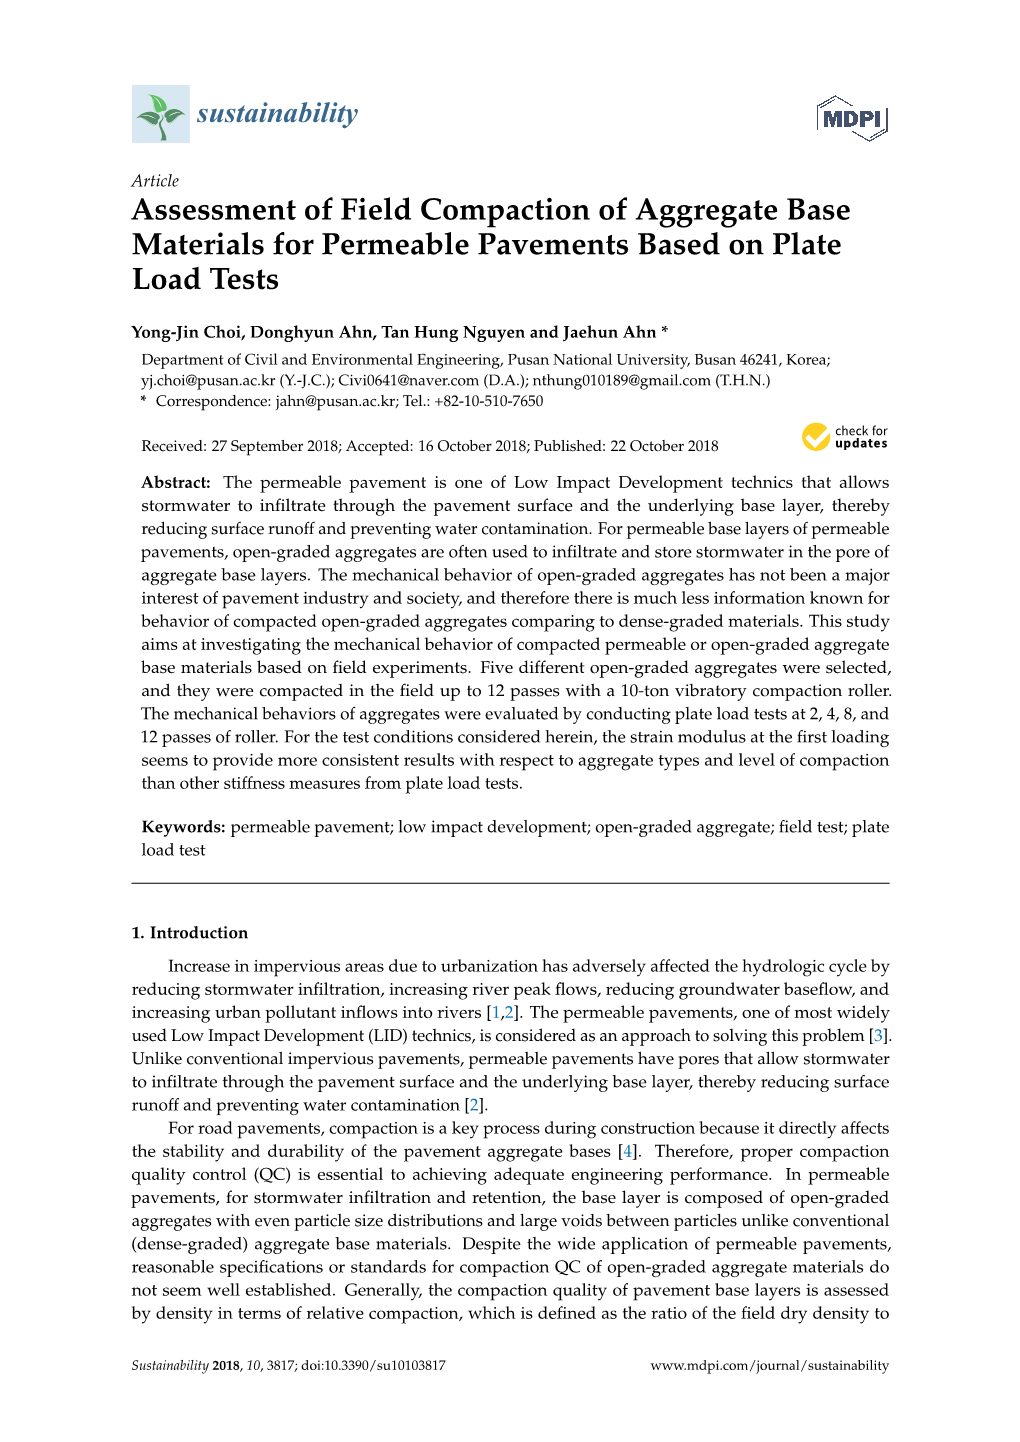 Assessment of Field Compaction of Aggregate Base Materials for Permeable Pavements Based on Plate Load Tests